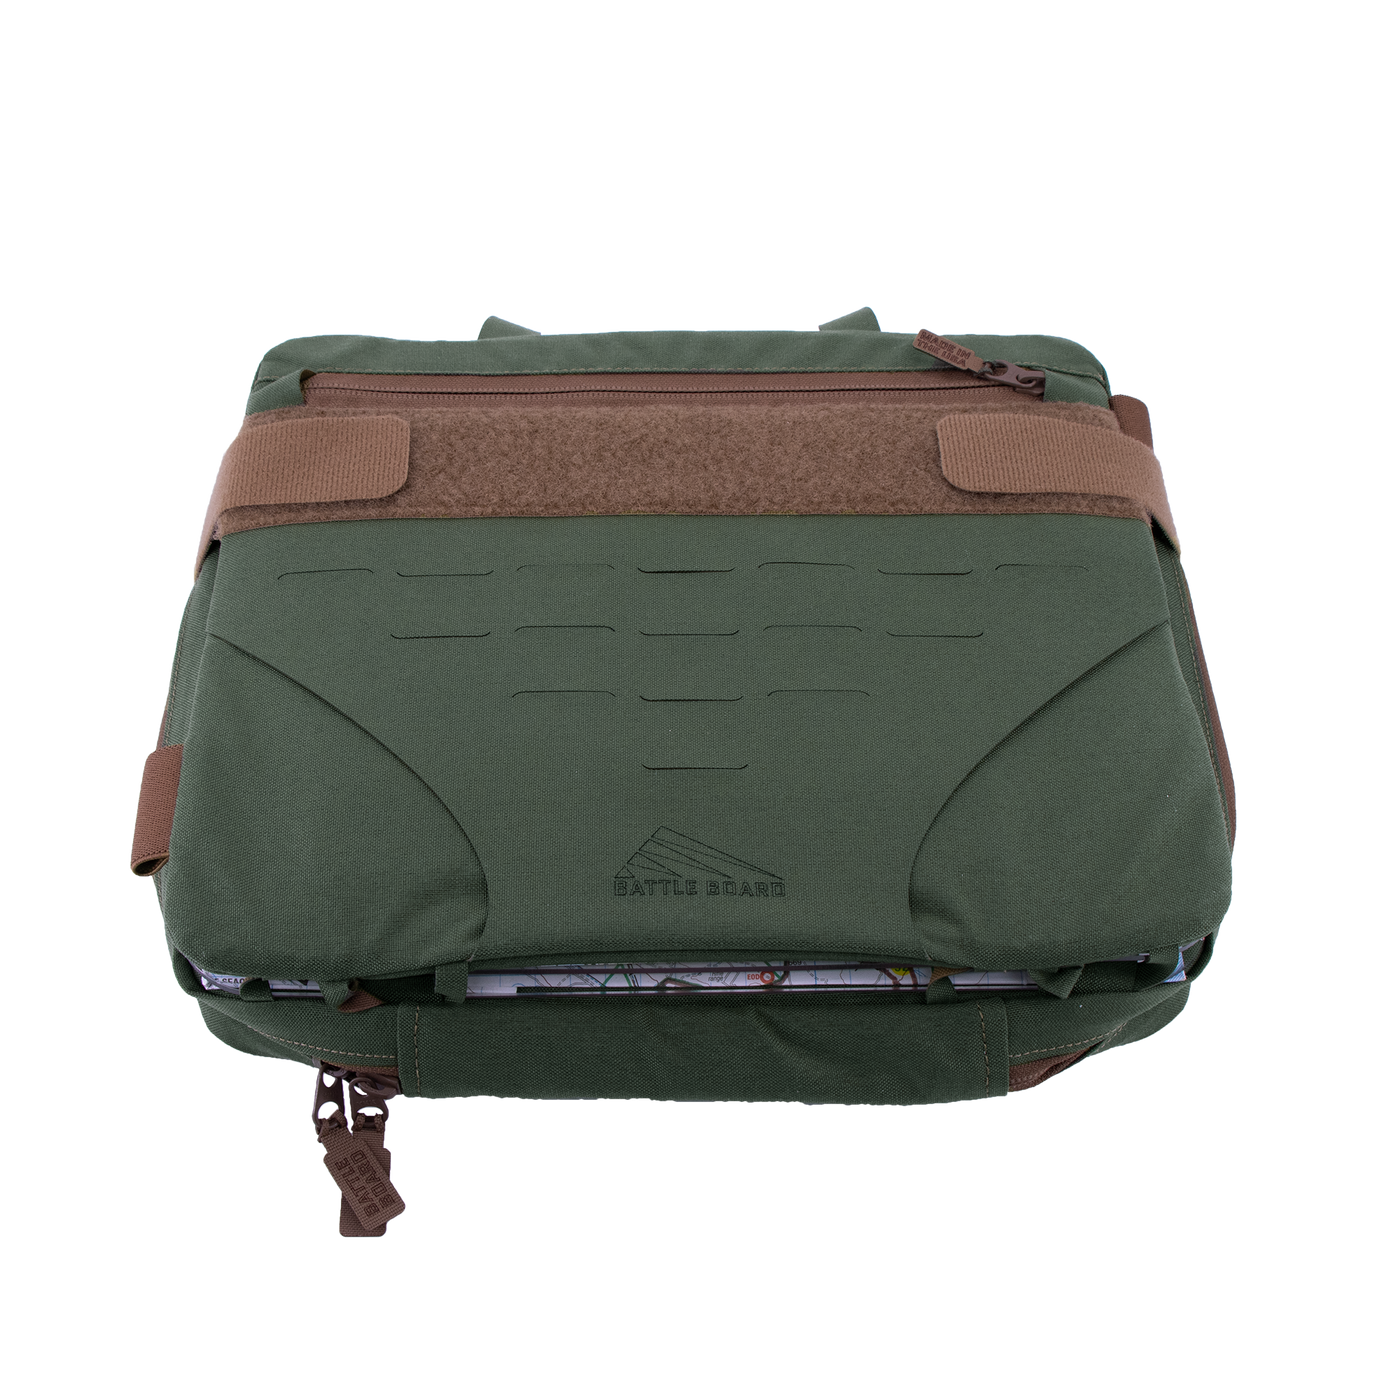 Battle Board FiST 4.0 in Olive, Closed with straps